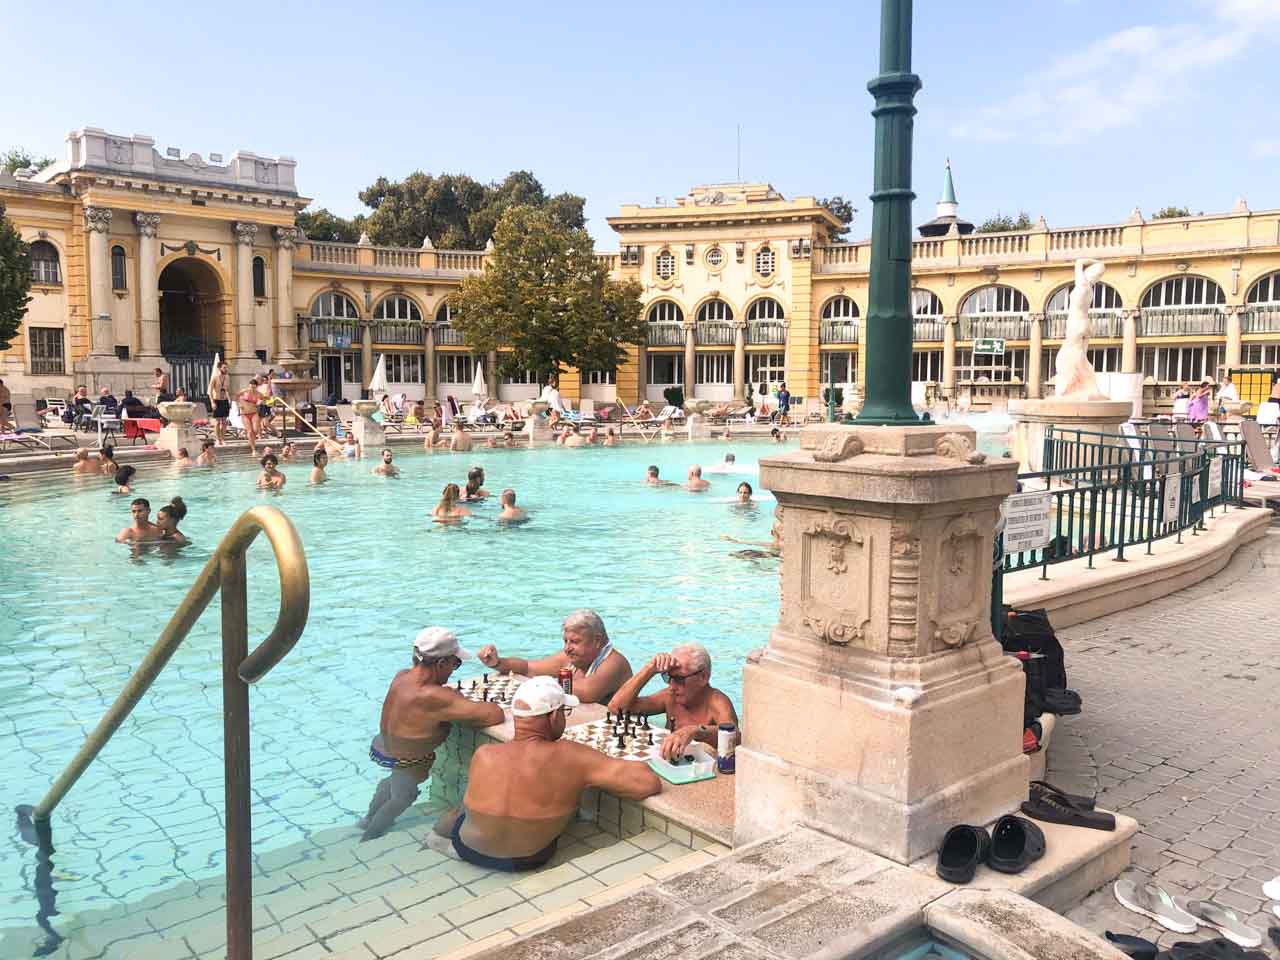 A group of men playing chess at the Széchenyi Thermal Bath in Budapest, Hungary